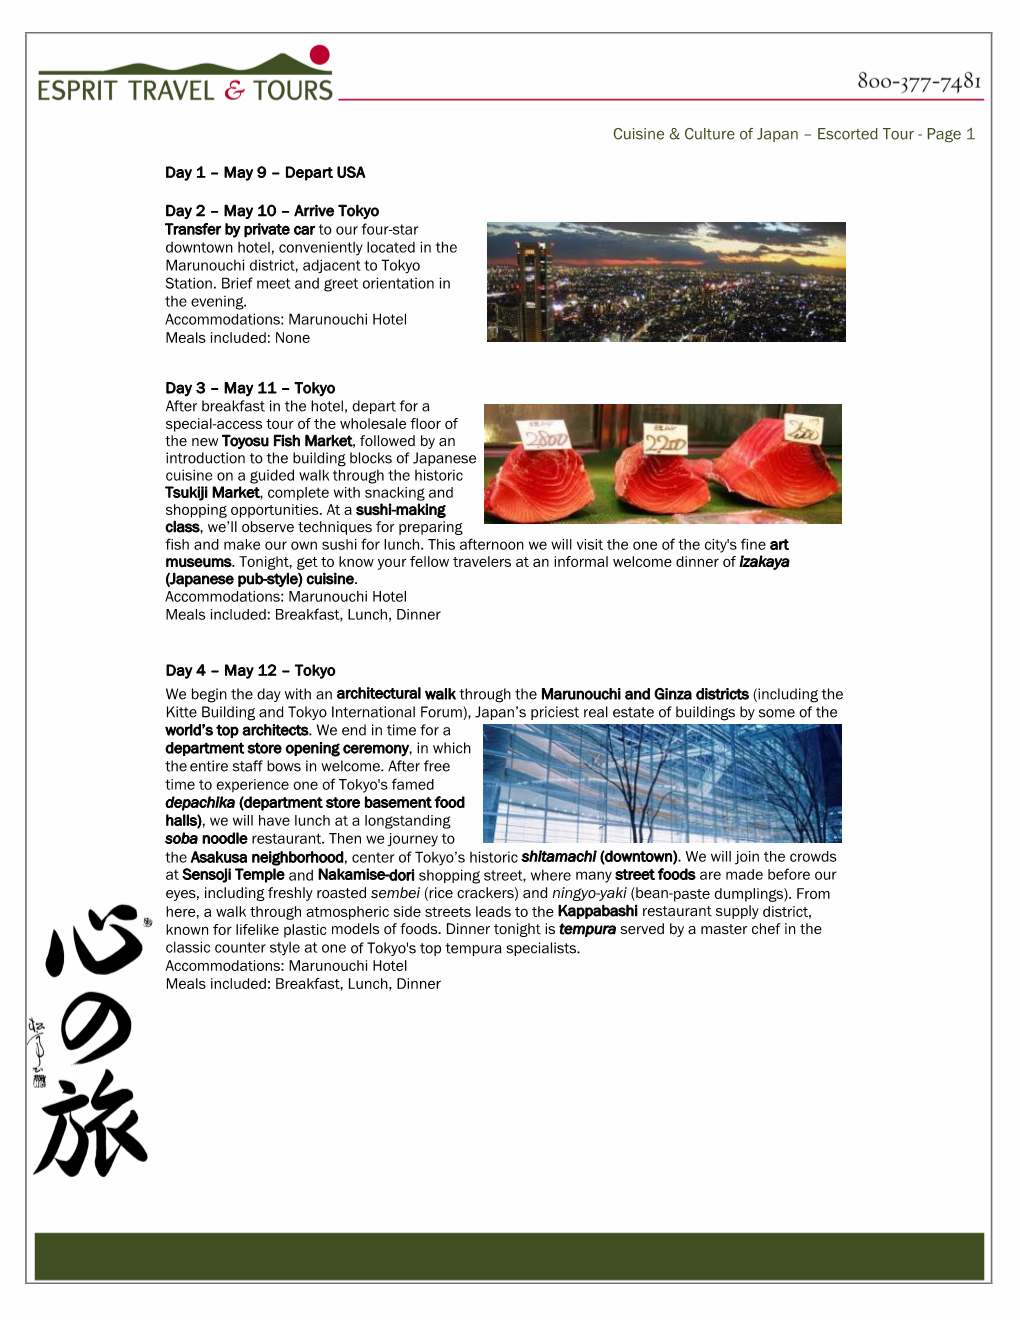 Cuisine and Culture of Japan Tour Itinerary